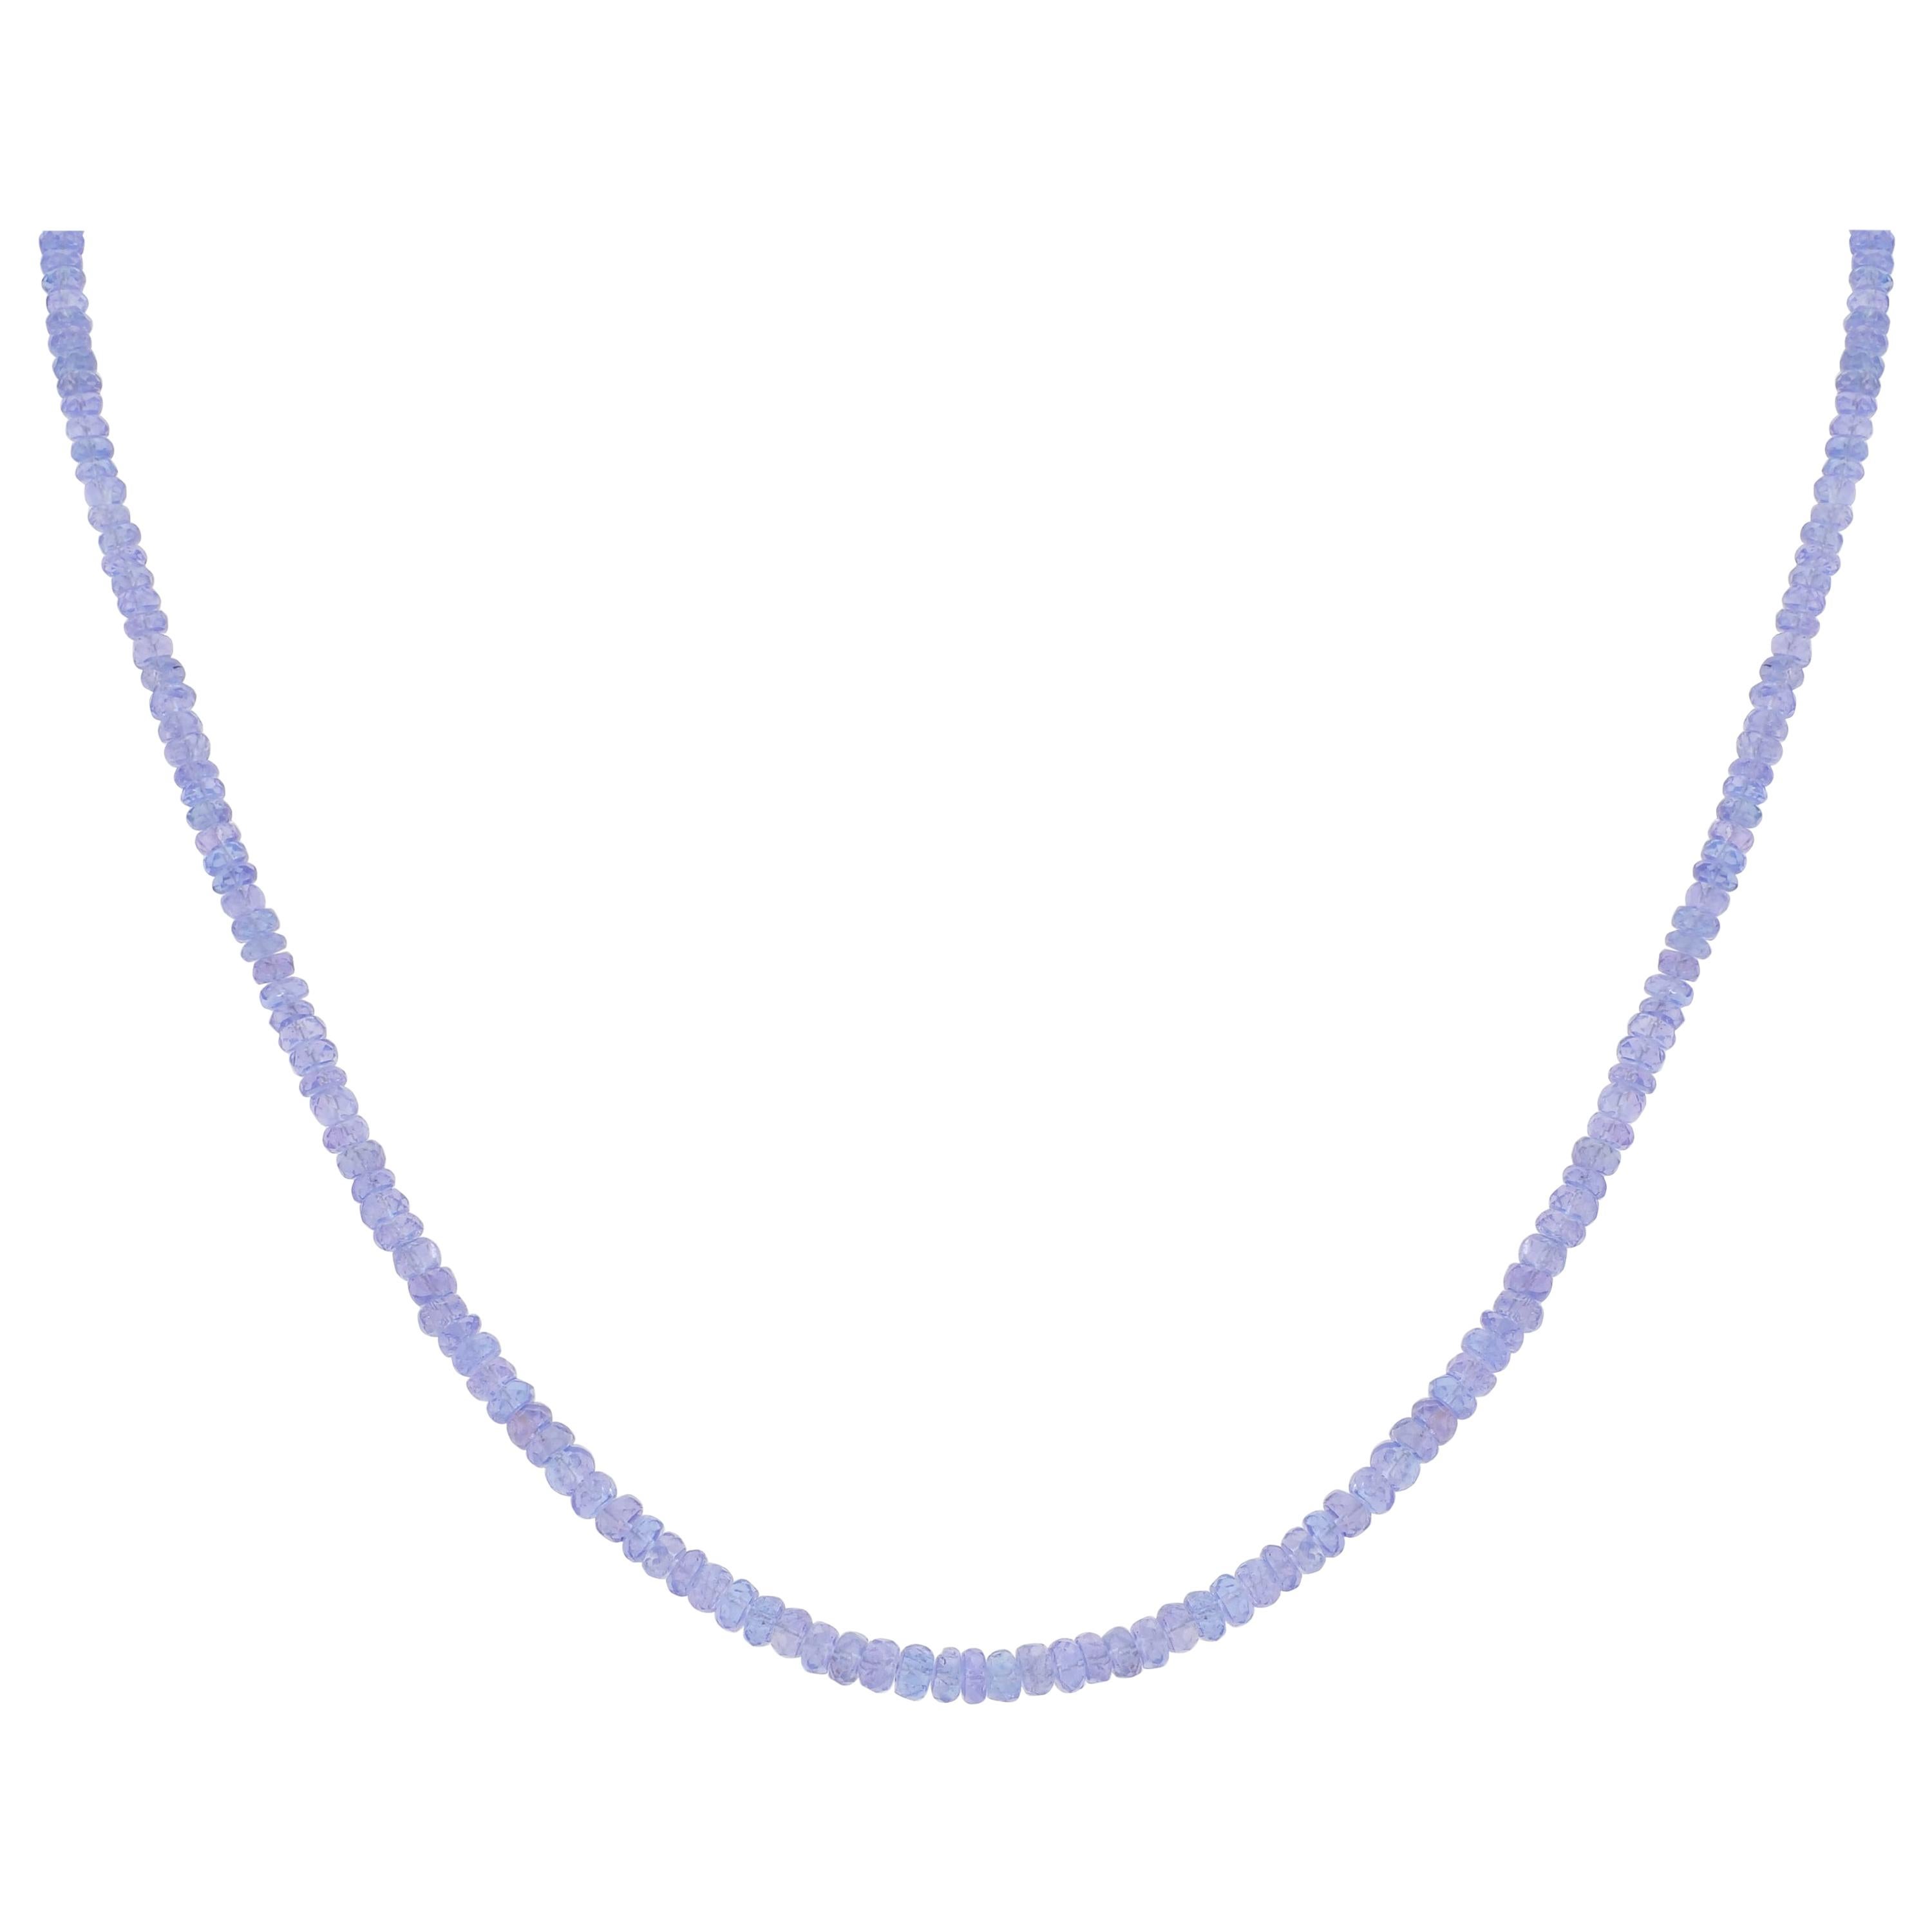 56.57 Carat Tanzanite Beads Necklace in Sterling Silver